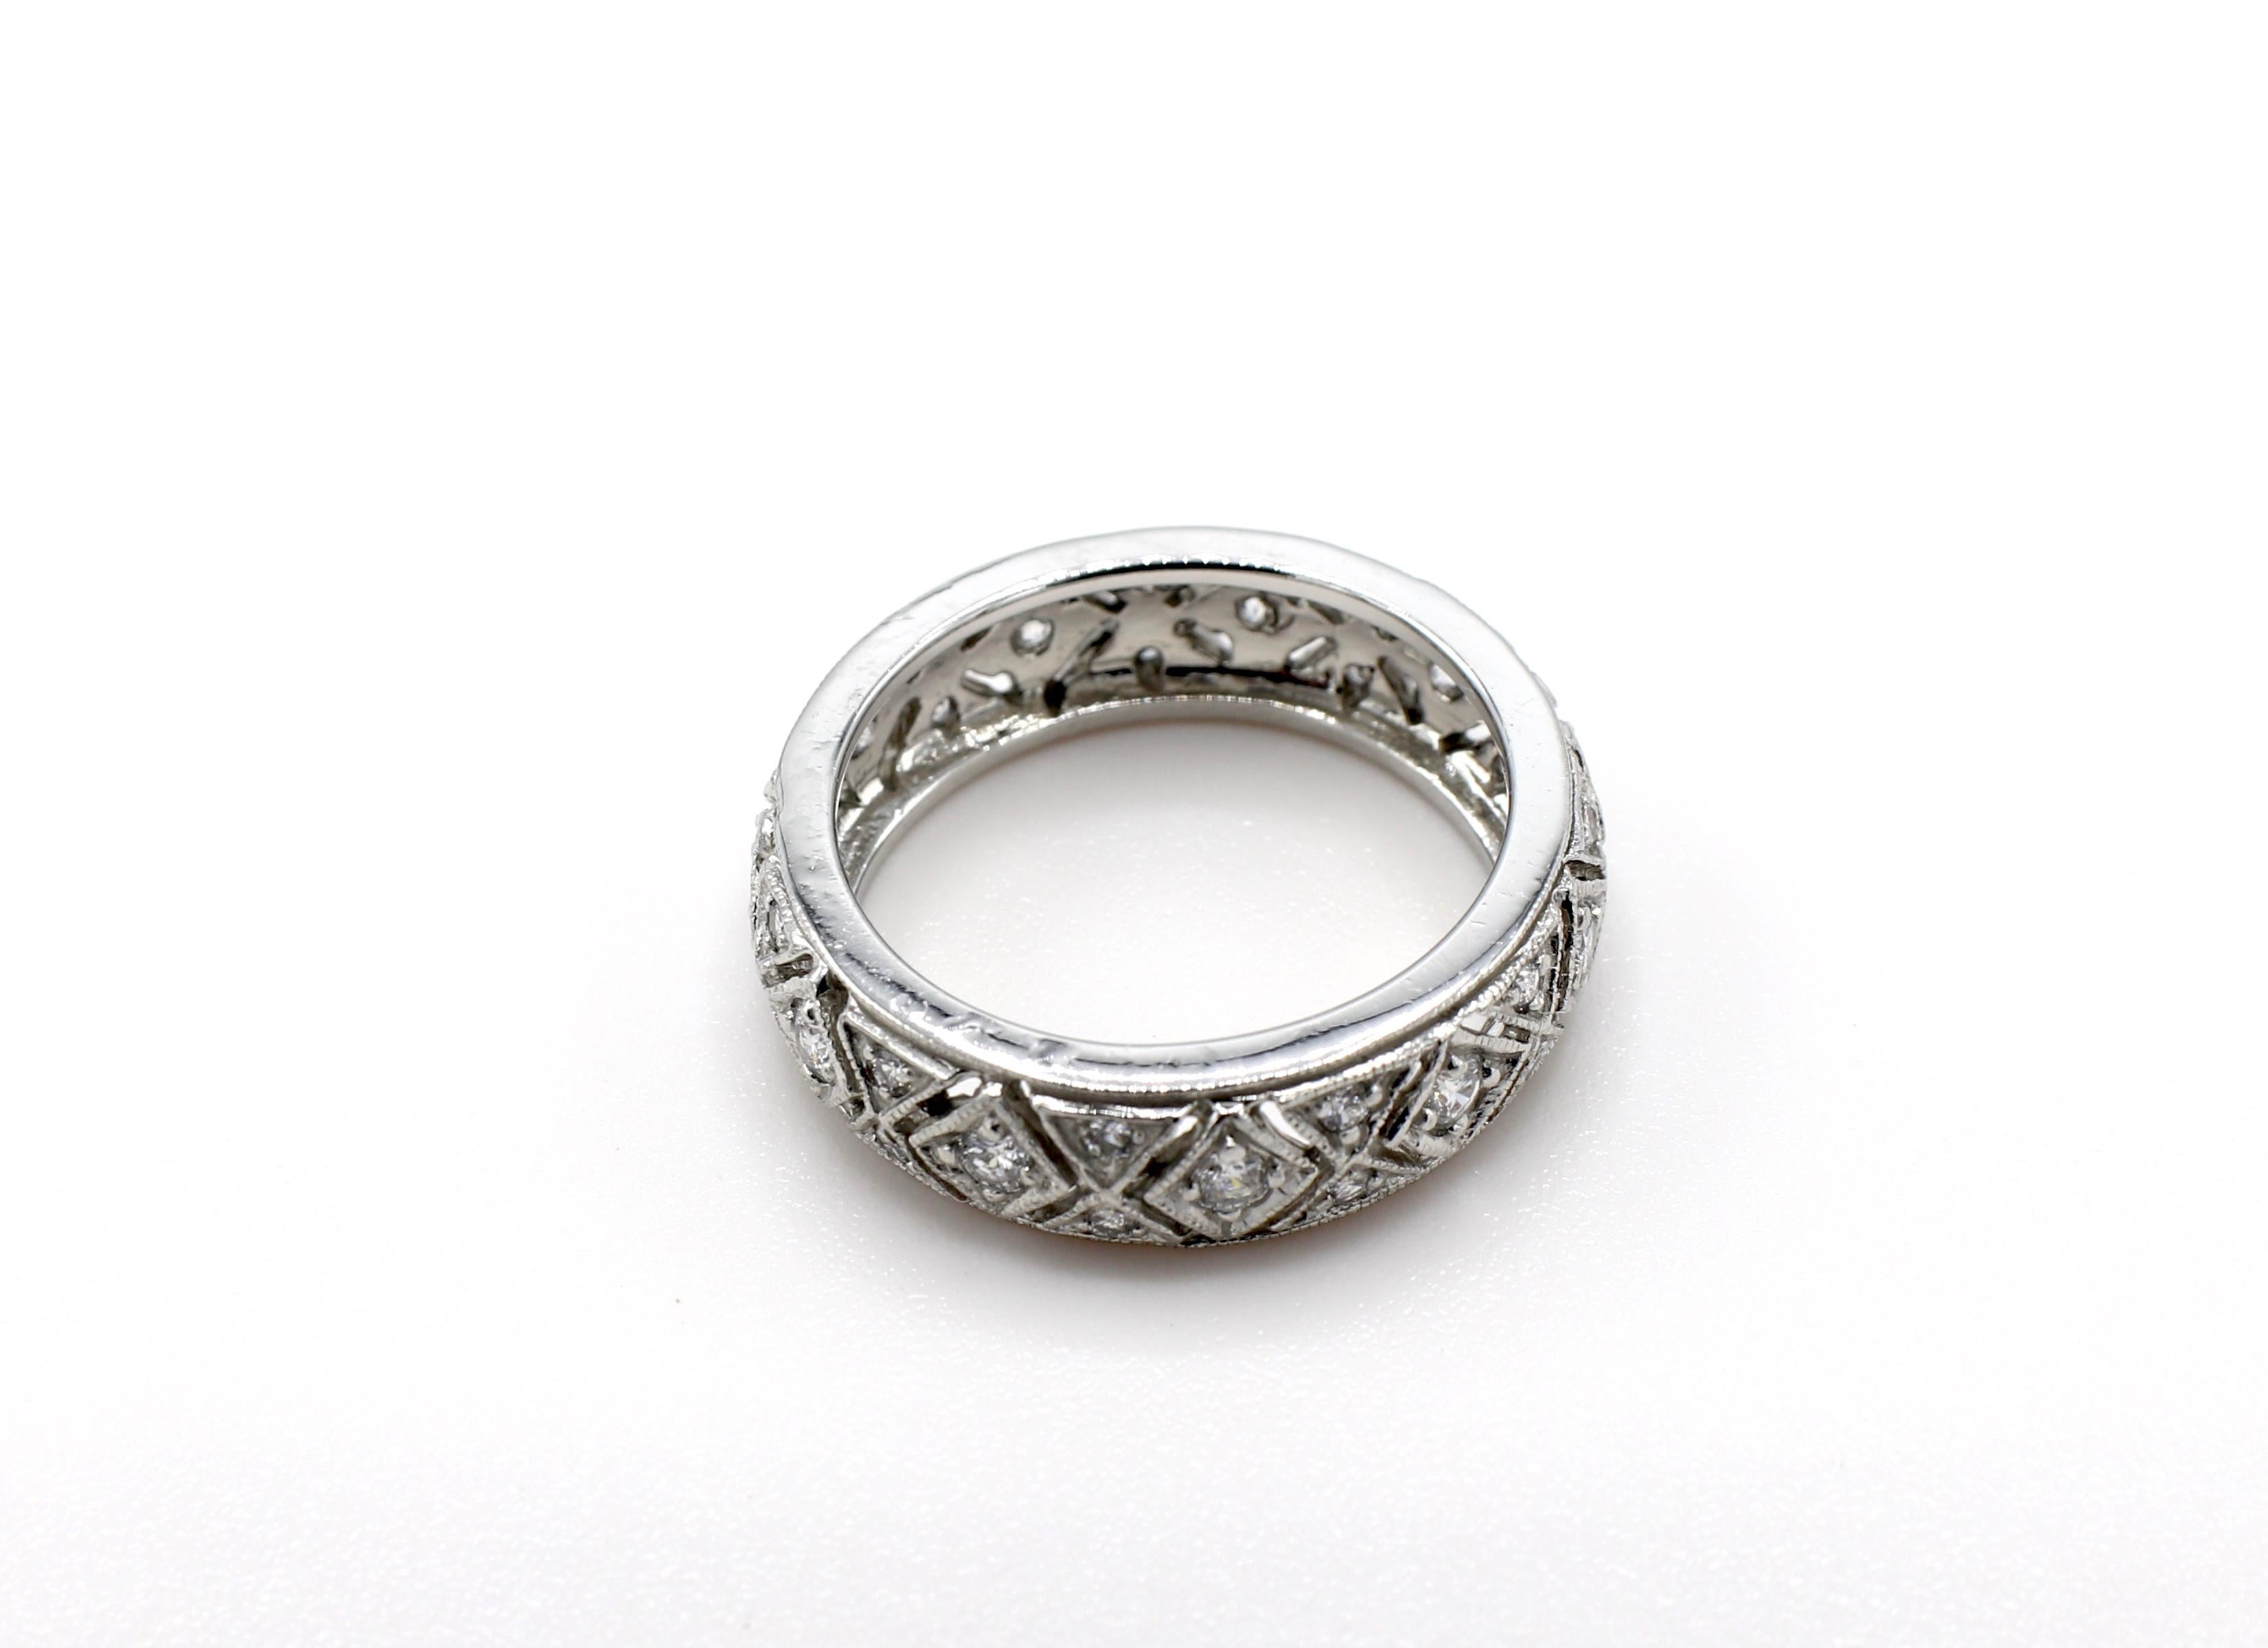 Platinum Diamond 0.55 CTW Filigree Eternity Wedding Band Round Diamonds Ring Size 7

Metal: Platinum
Diamonds: 35 round brilliant cut diamonds approx. 0.55 ctw G-H SI. 
Weight: 8.08 grams
Size: 7 
Markings: This ring has been tested for Platinum but